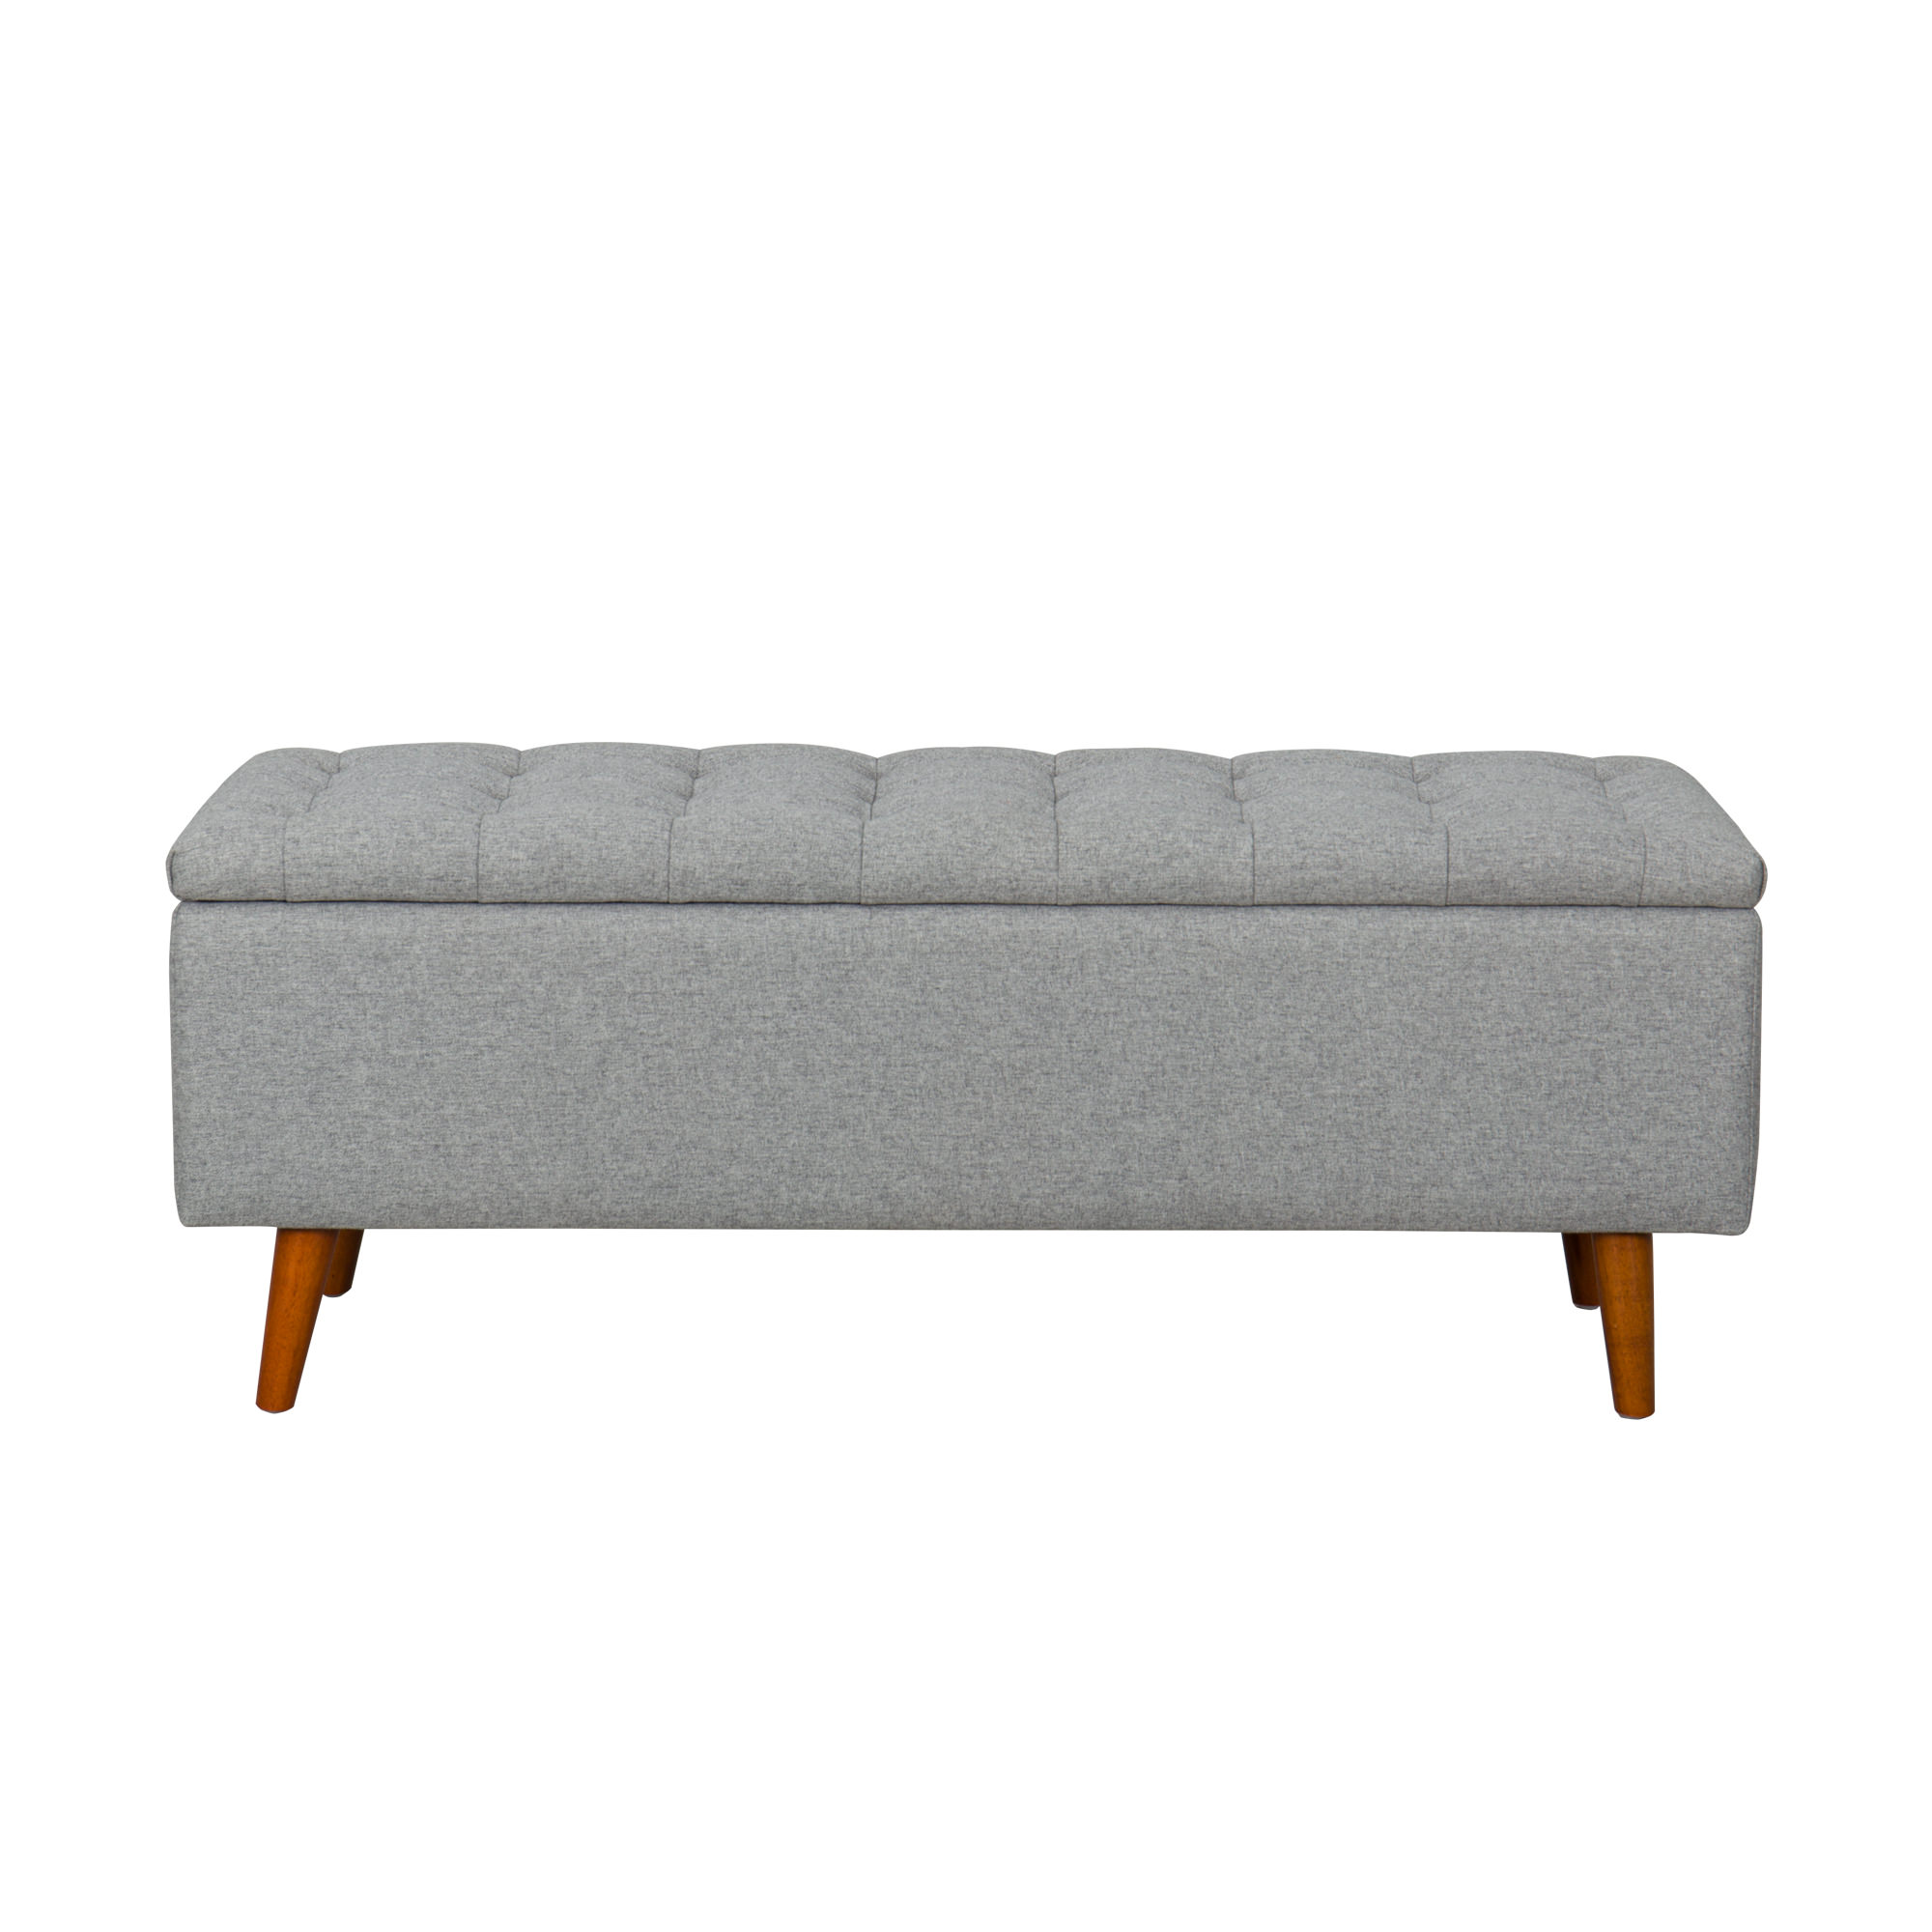 HomePop Textured Woven Storage Bench with Button Tuffting and Hinged Lid Light Gray